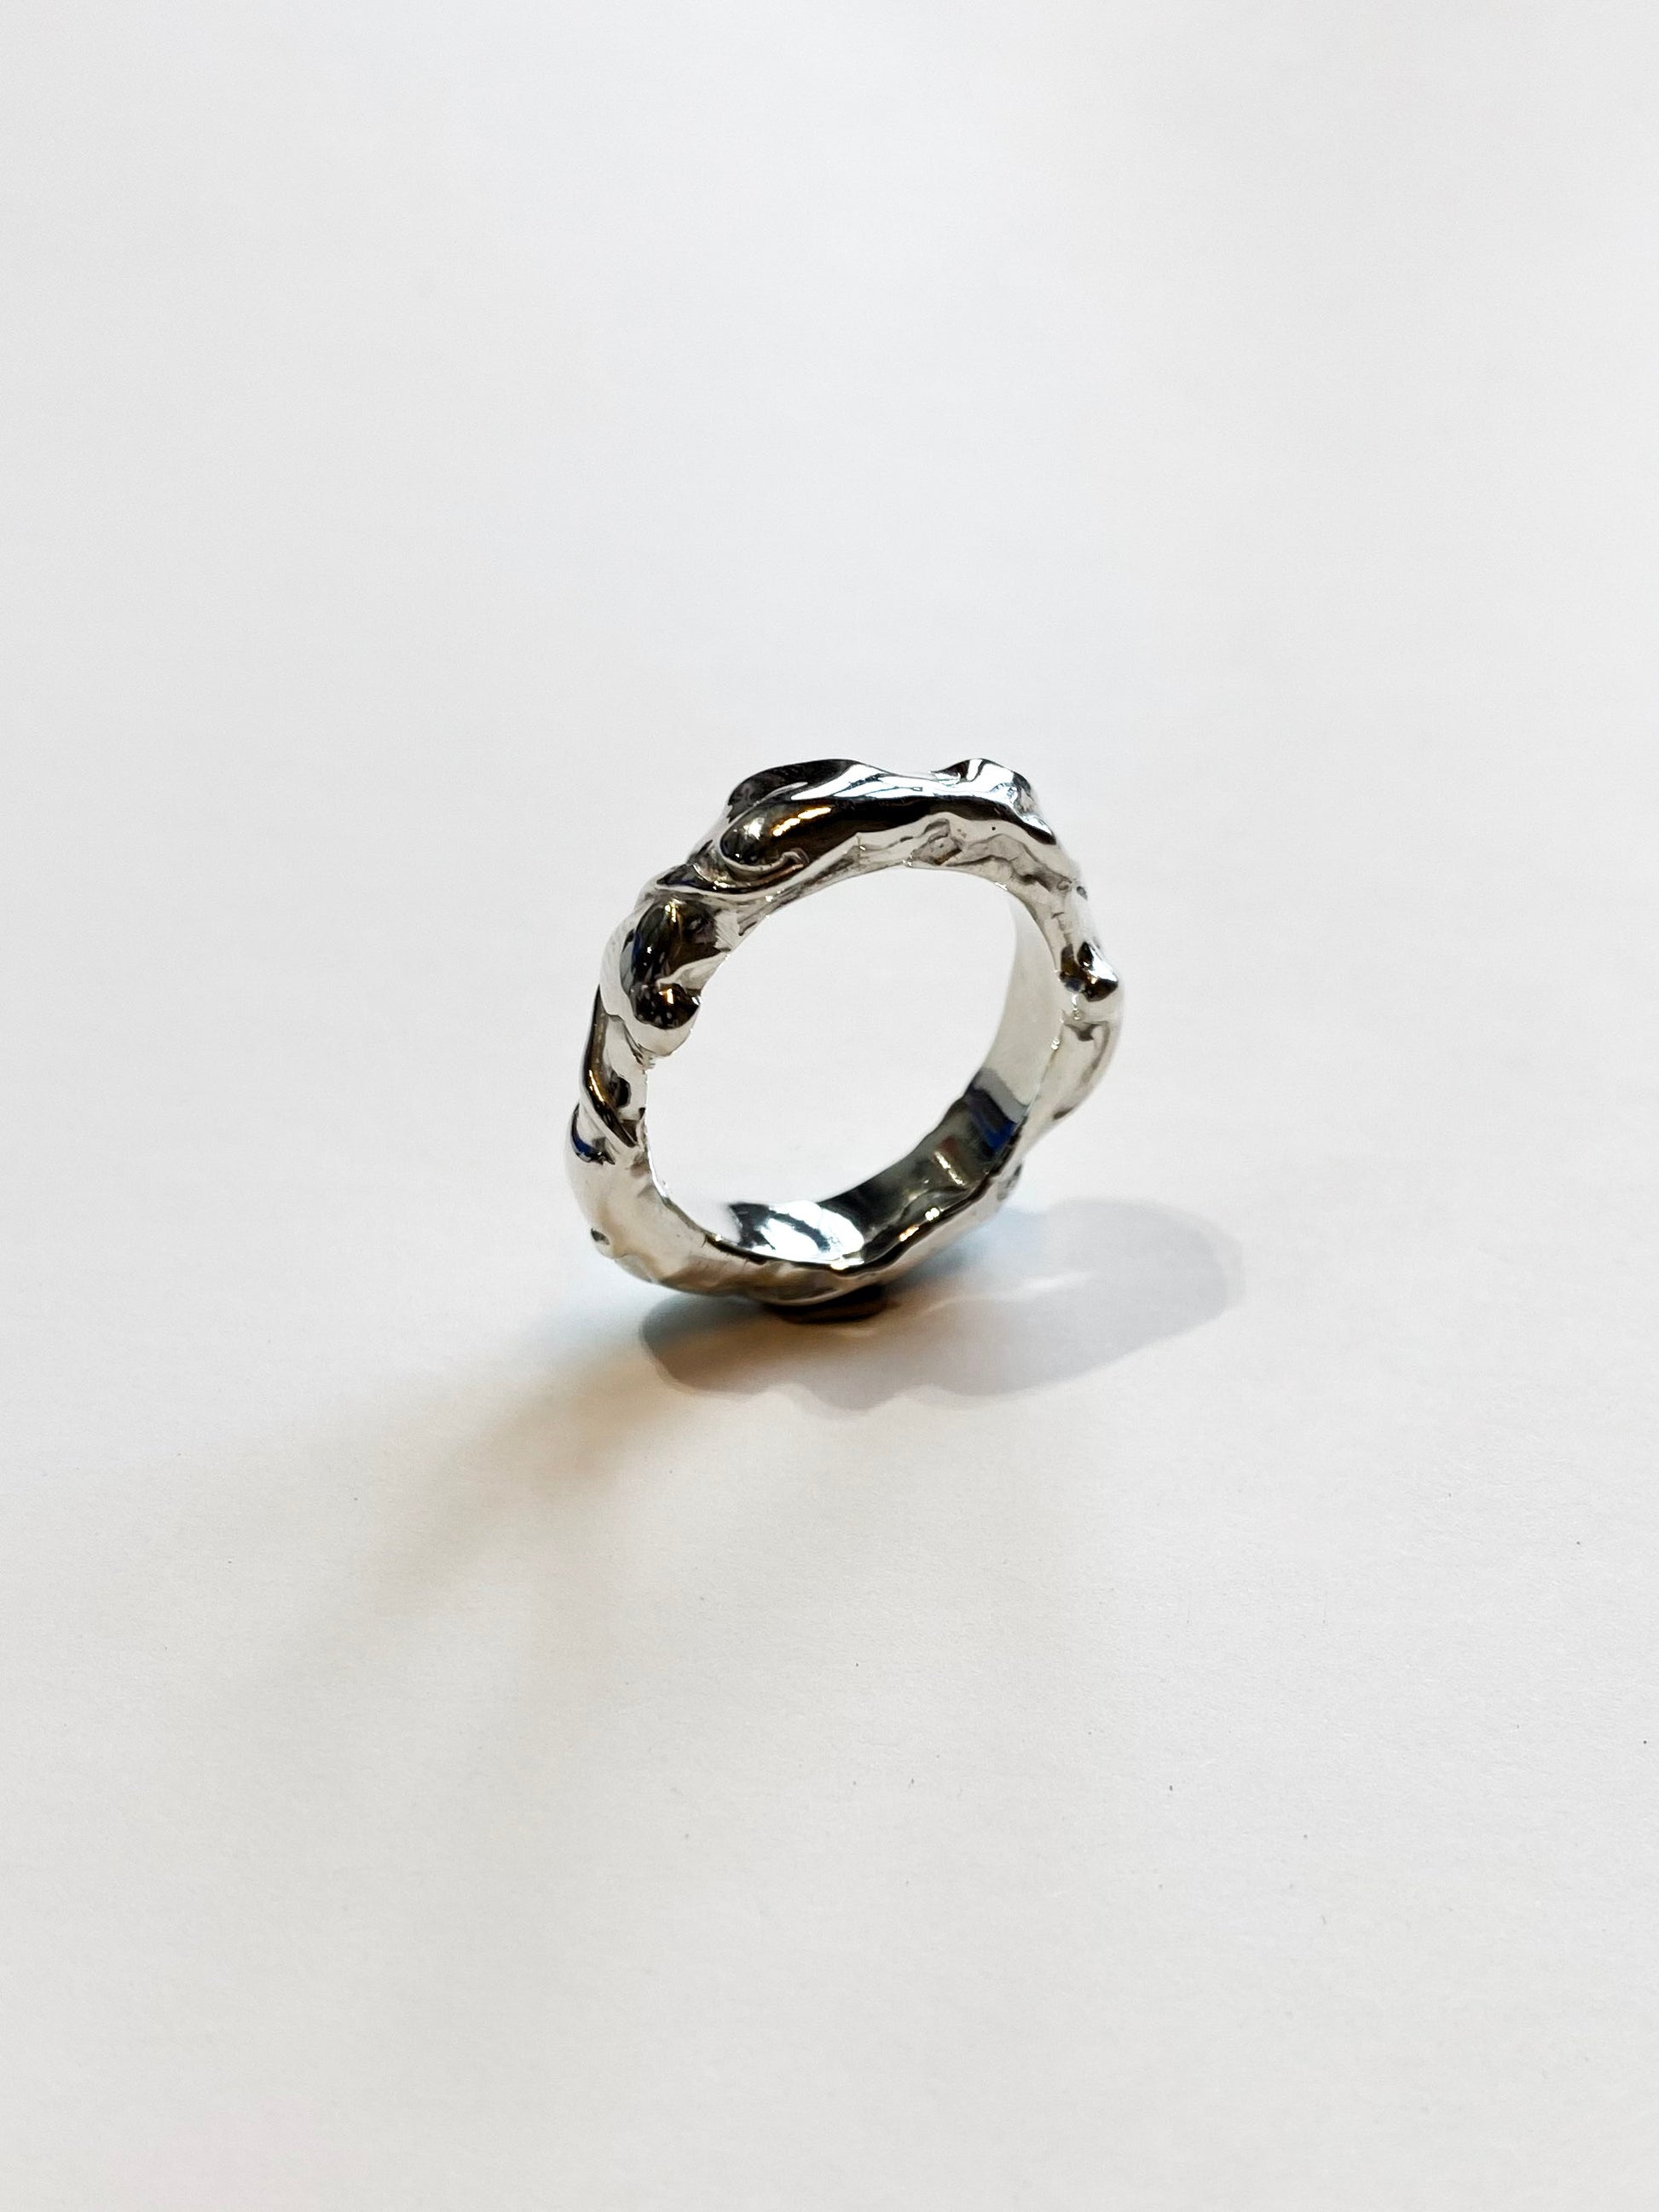 Silver molten ring on white background